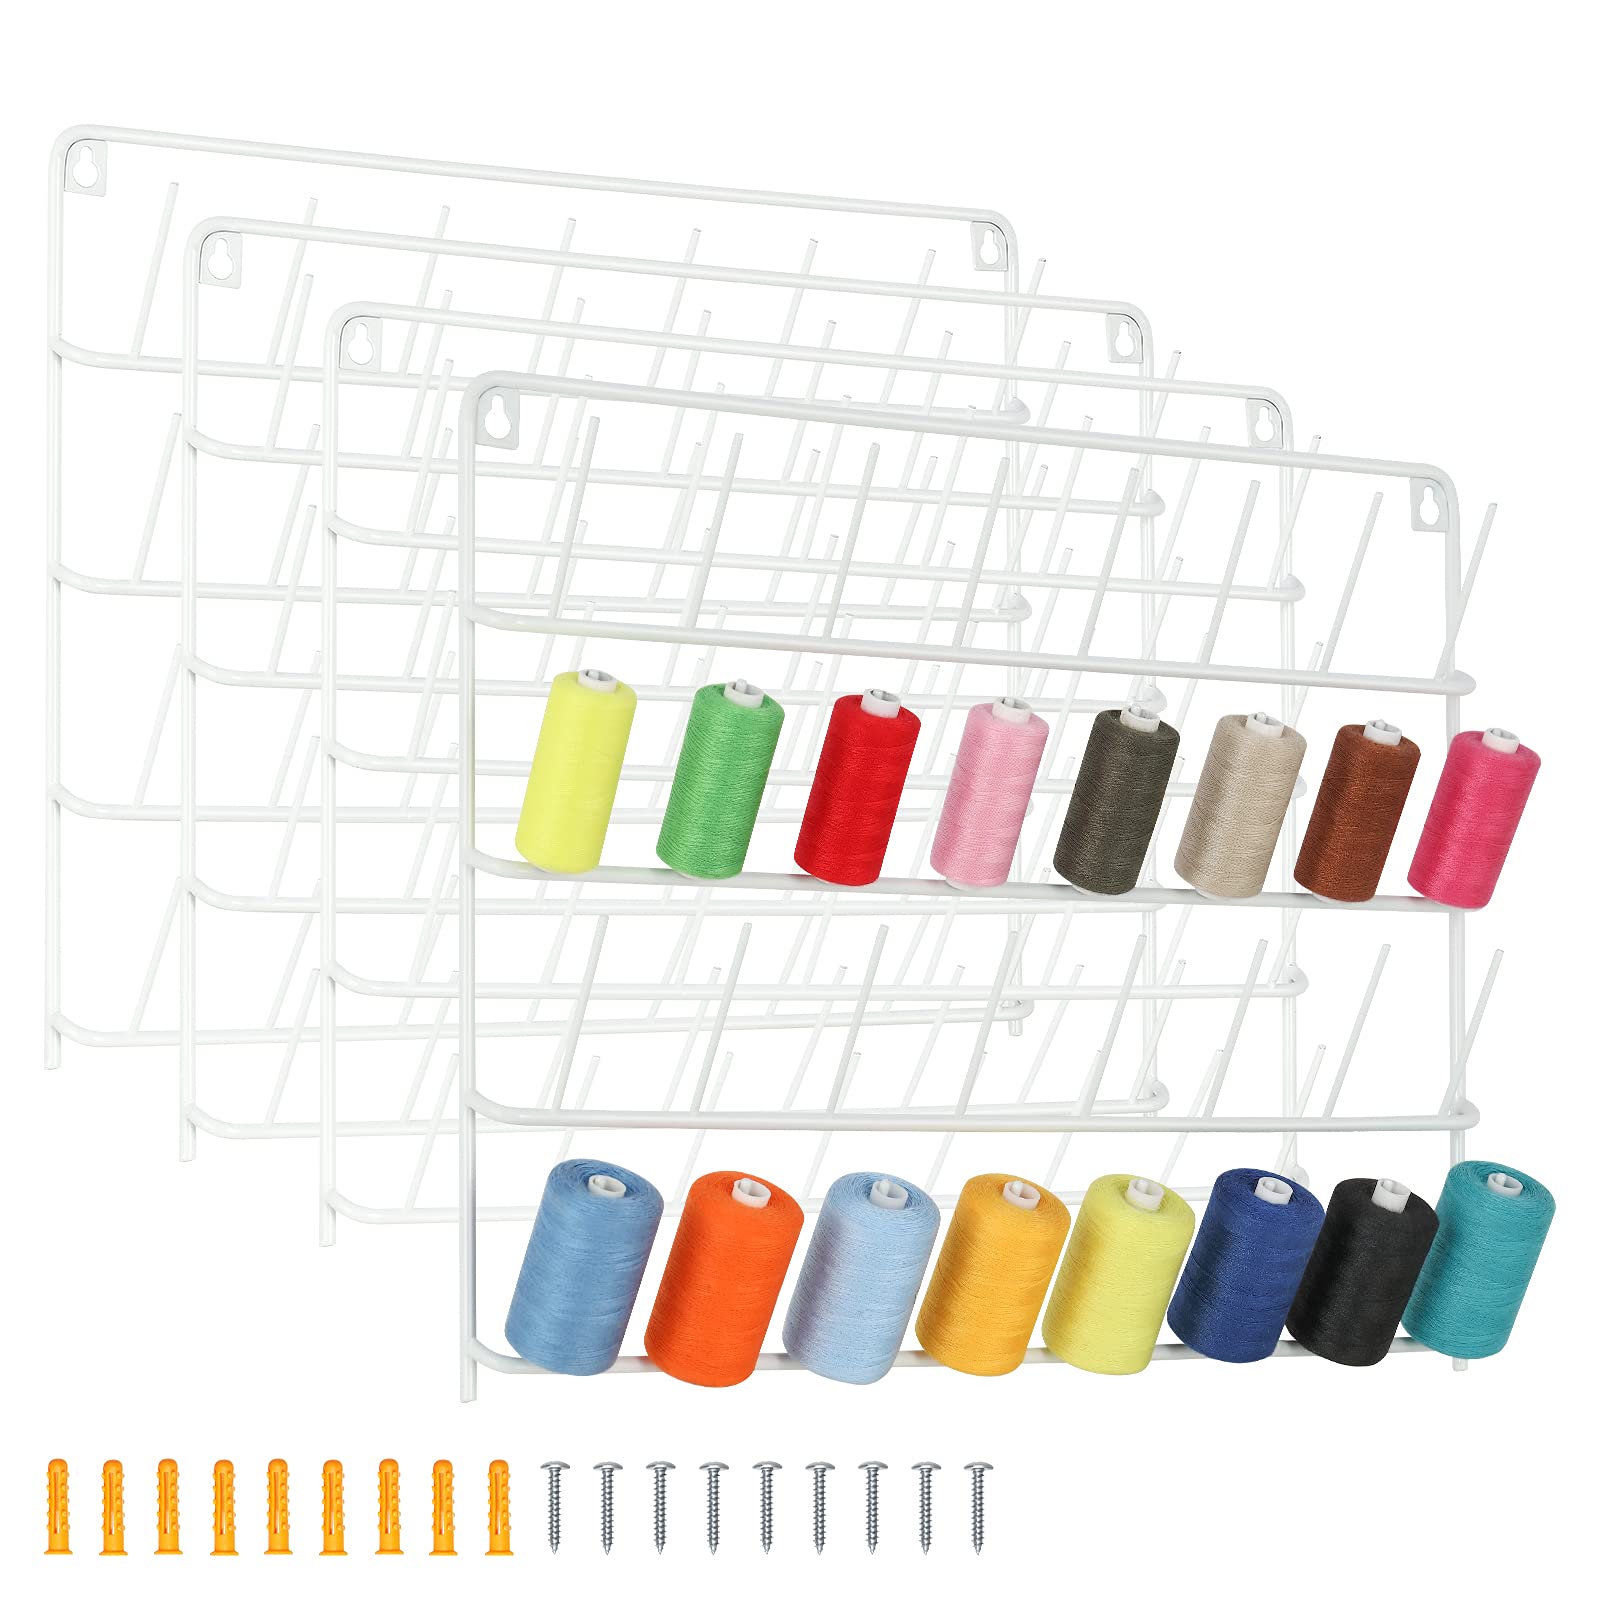 HAITARL 4 Set of Sewing Thread Organizer Wall-Mounted Metal Thread Rack  32-Spool Thread Holder with Hanging Hooks for Organizing Threads White